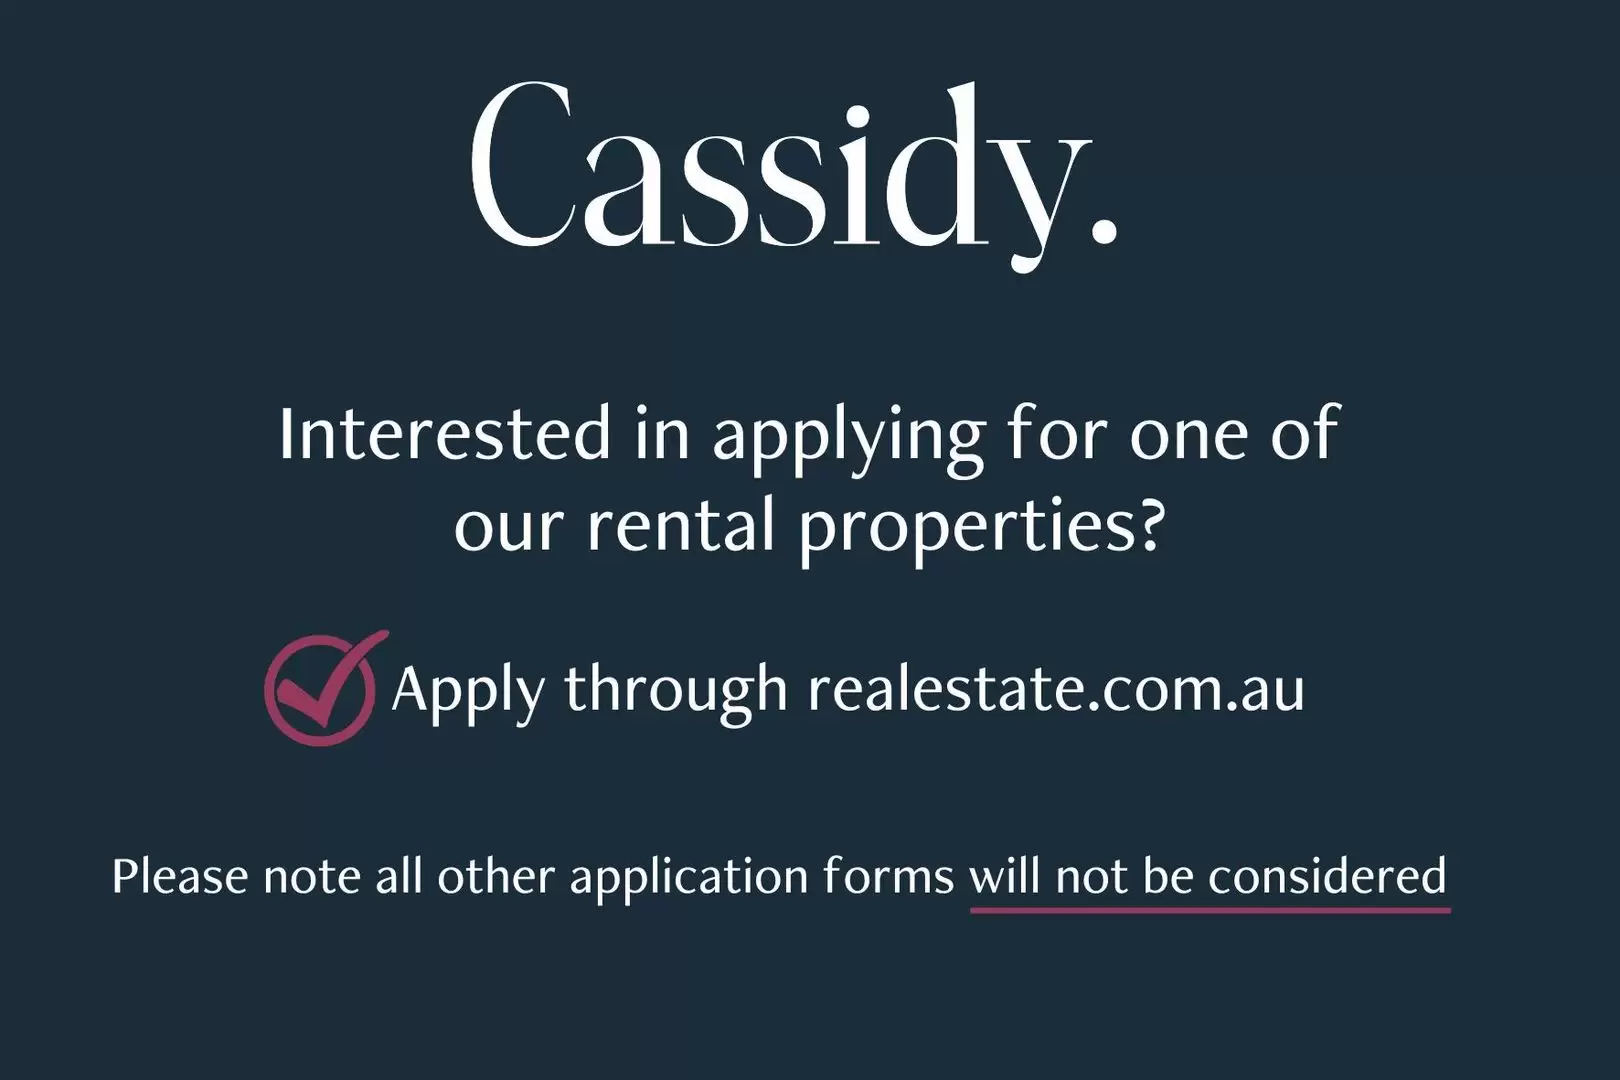 32 Clarke Street, West Ryde For Lease by Cassidy Real Estate - image 1